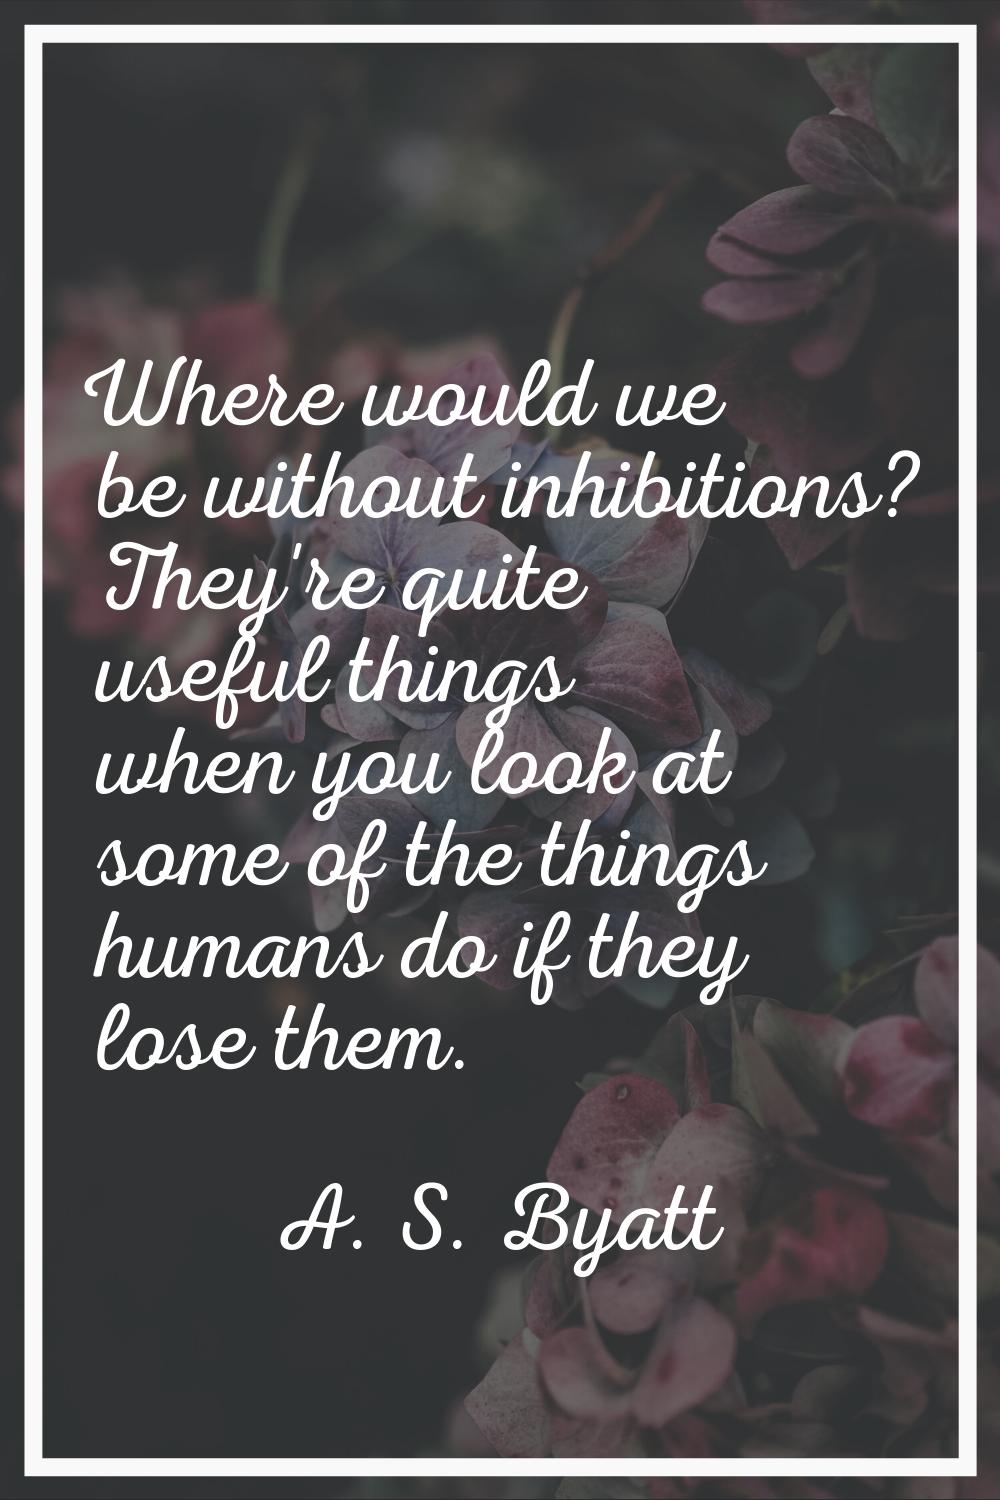 Where would we be without inhibitions? They're quite useful things when you look at some of the thi